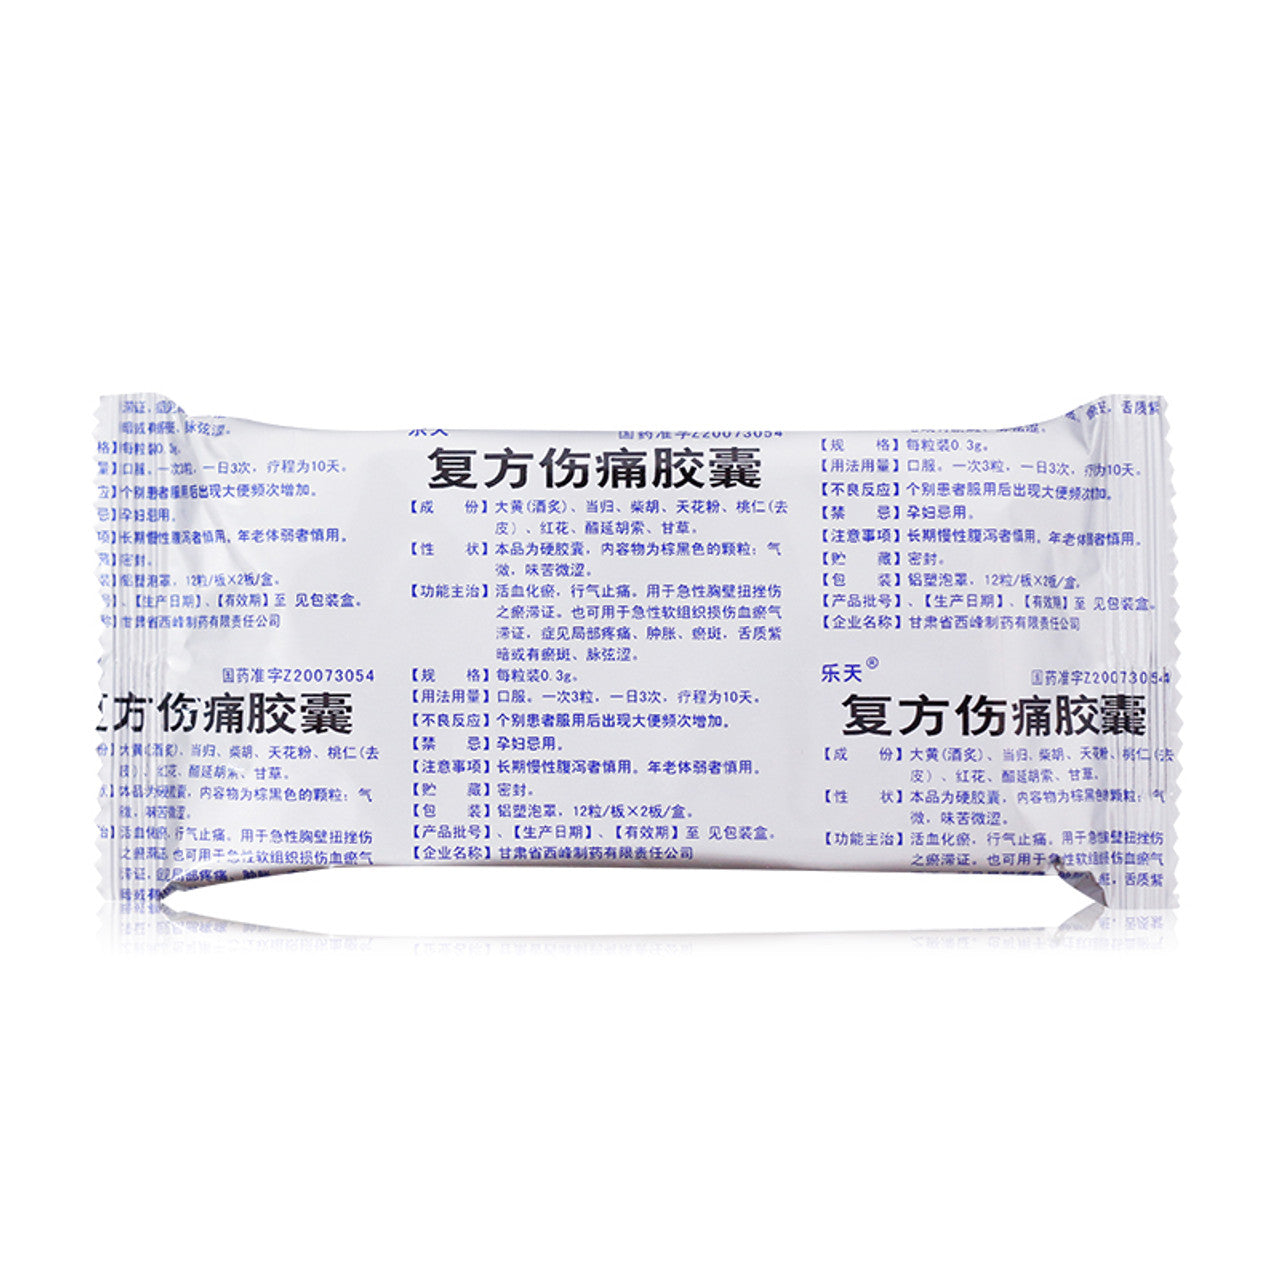 Chinese Herbs. Brand Letian. Fufang Shangtong Jiaonang or Fufang Shangtong Capsules or FufangShangtongJiaonang or Fu Fang Shang Tong Jiao Nang for acute soft tissue injury with blood stasis and qi stagnation syndrome